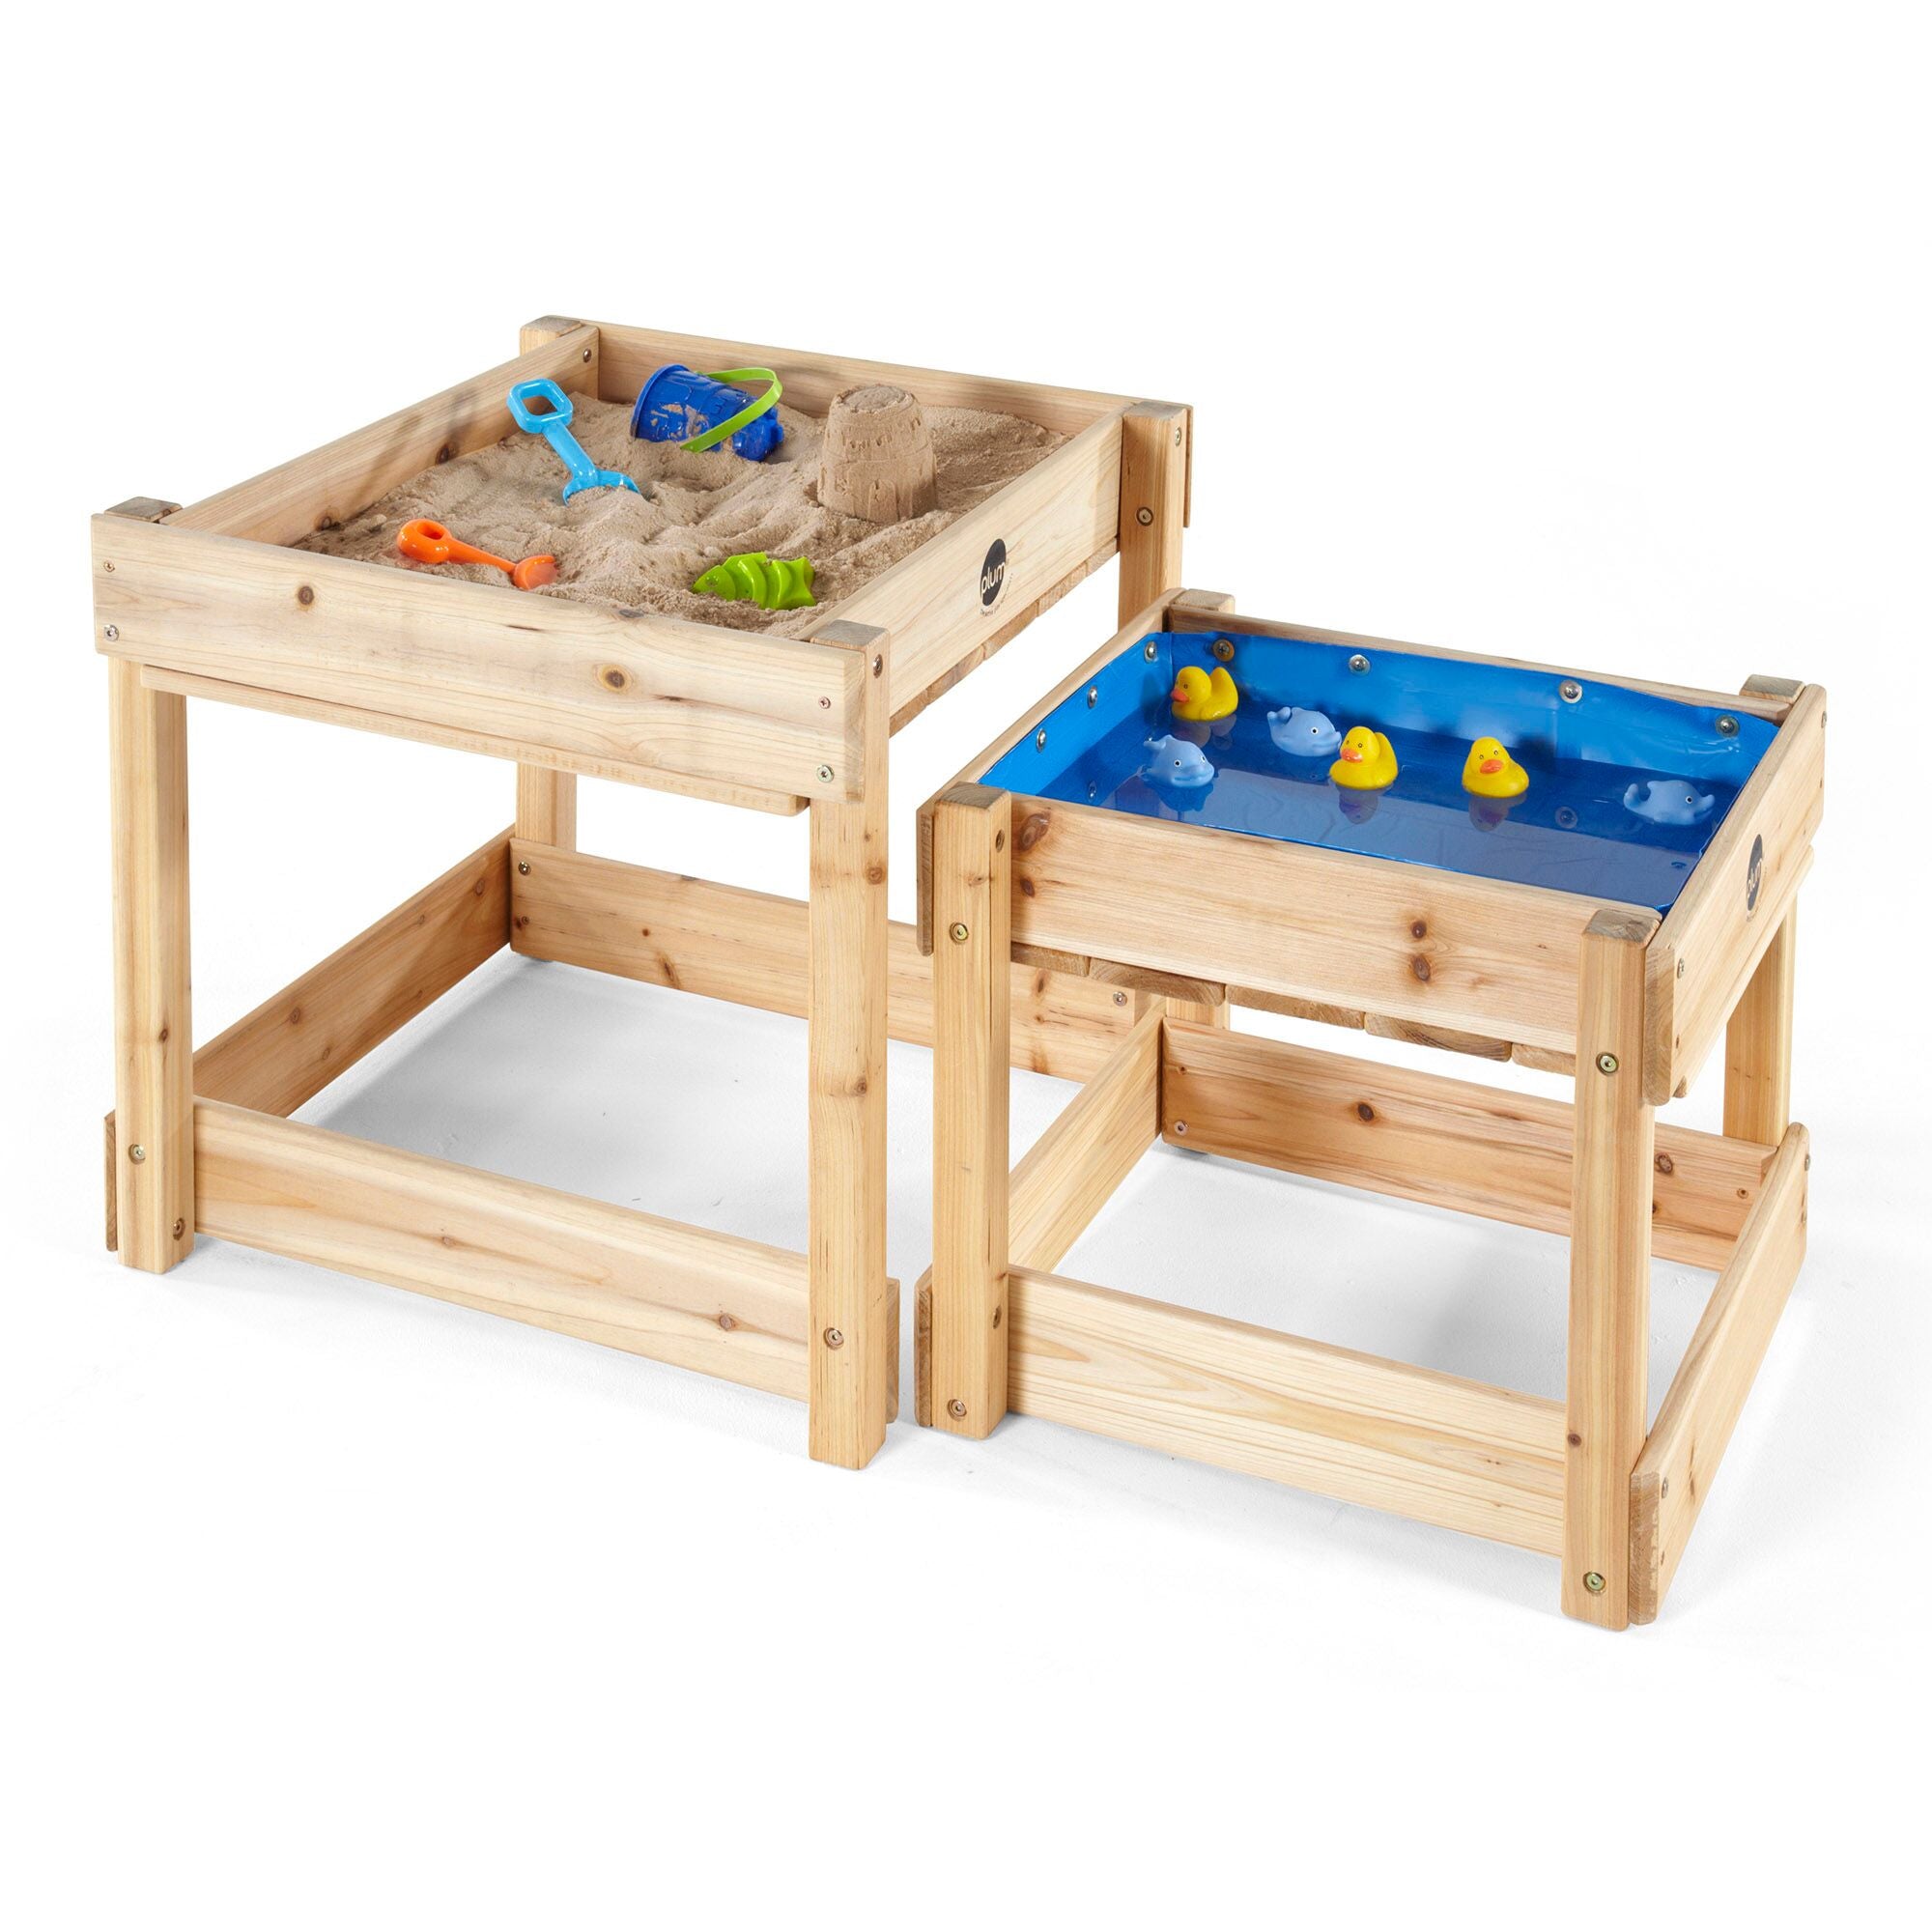 Sand and Water Wooden Tables (Natural) by Plum Play